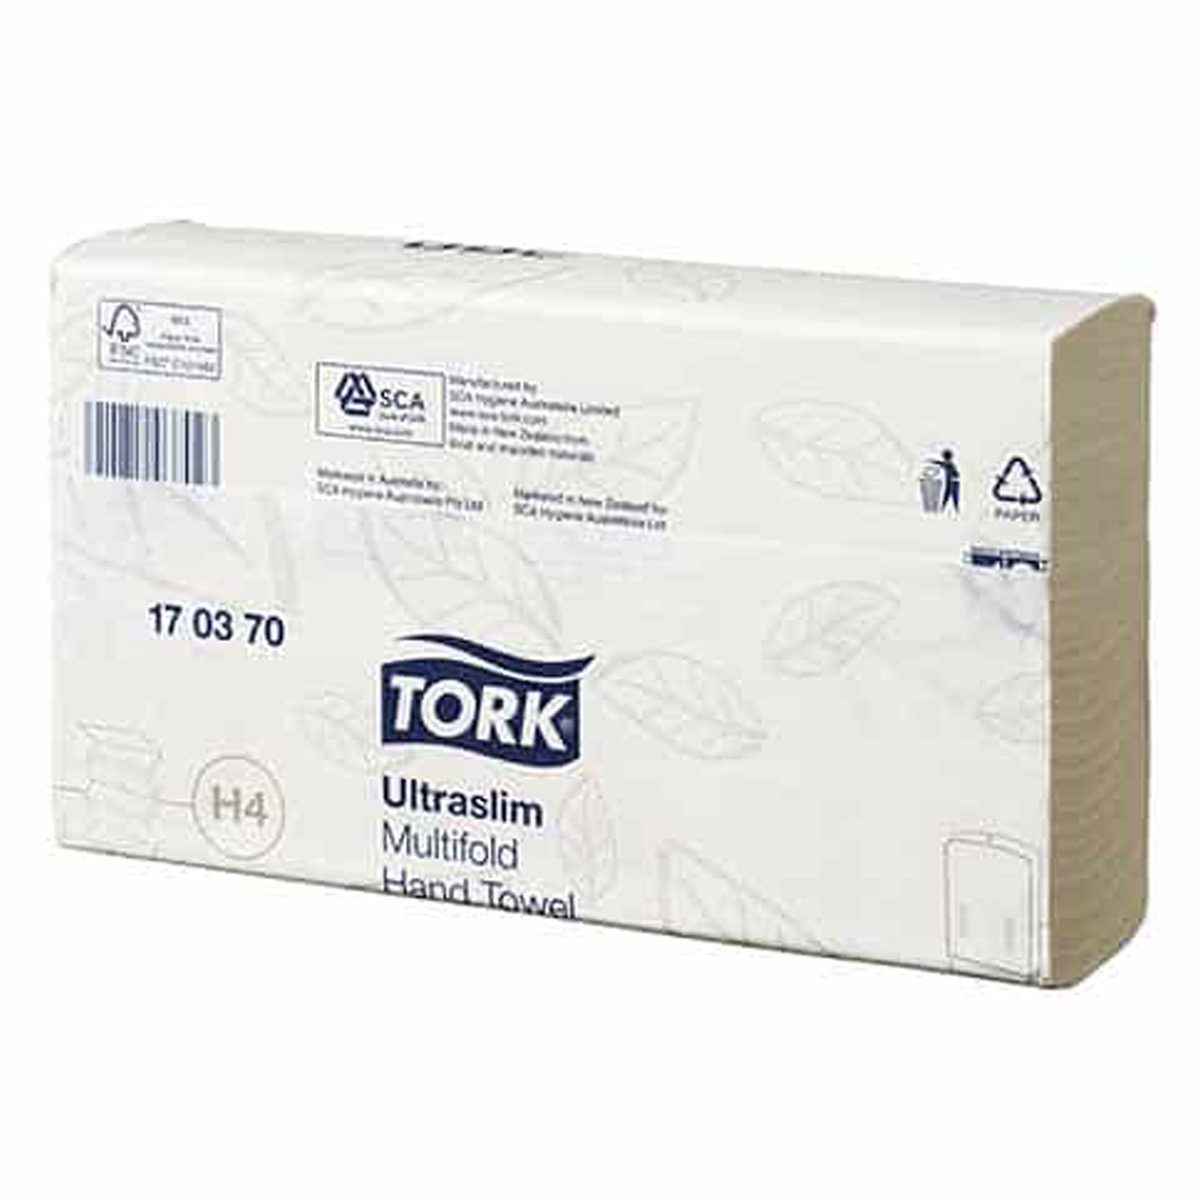 paper-products-paper-towels-tork-ultra-slim-multi-fold-towel-advanced-1-ply-150-sheets-20-packs-h4-thick-absorbent-suitable-wide-range-customer-environments-vjs-distributors-170370